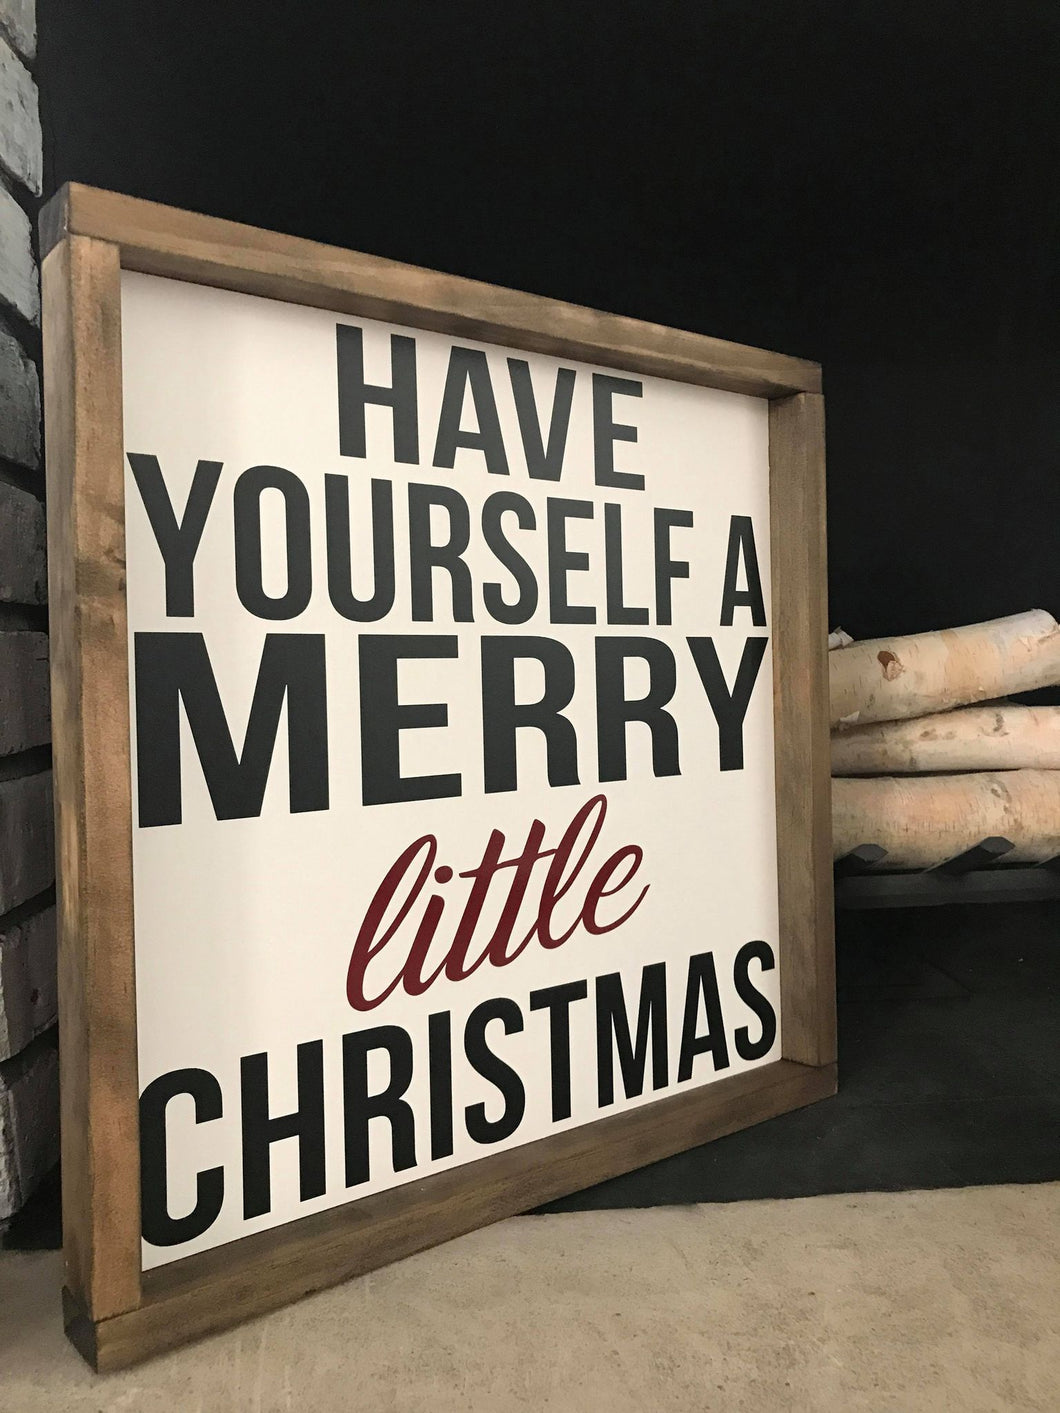 Have yourself a merry little Christmas